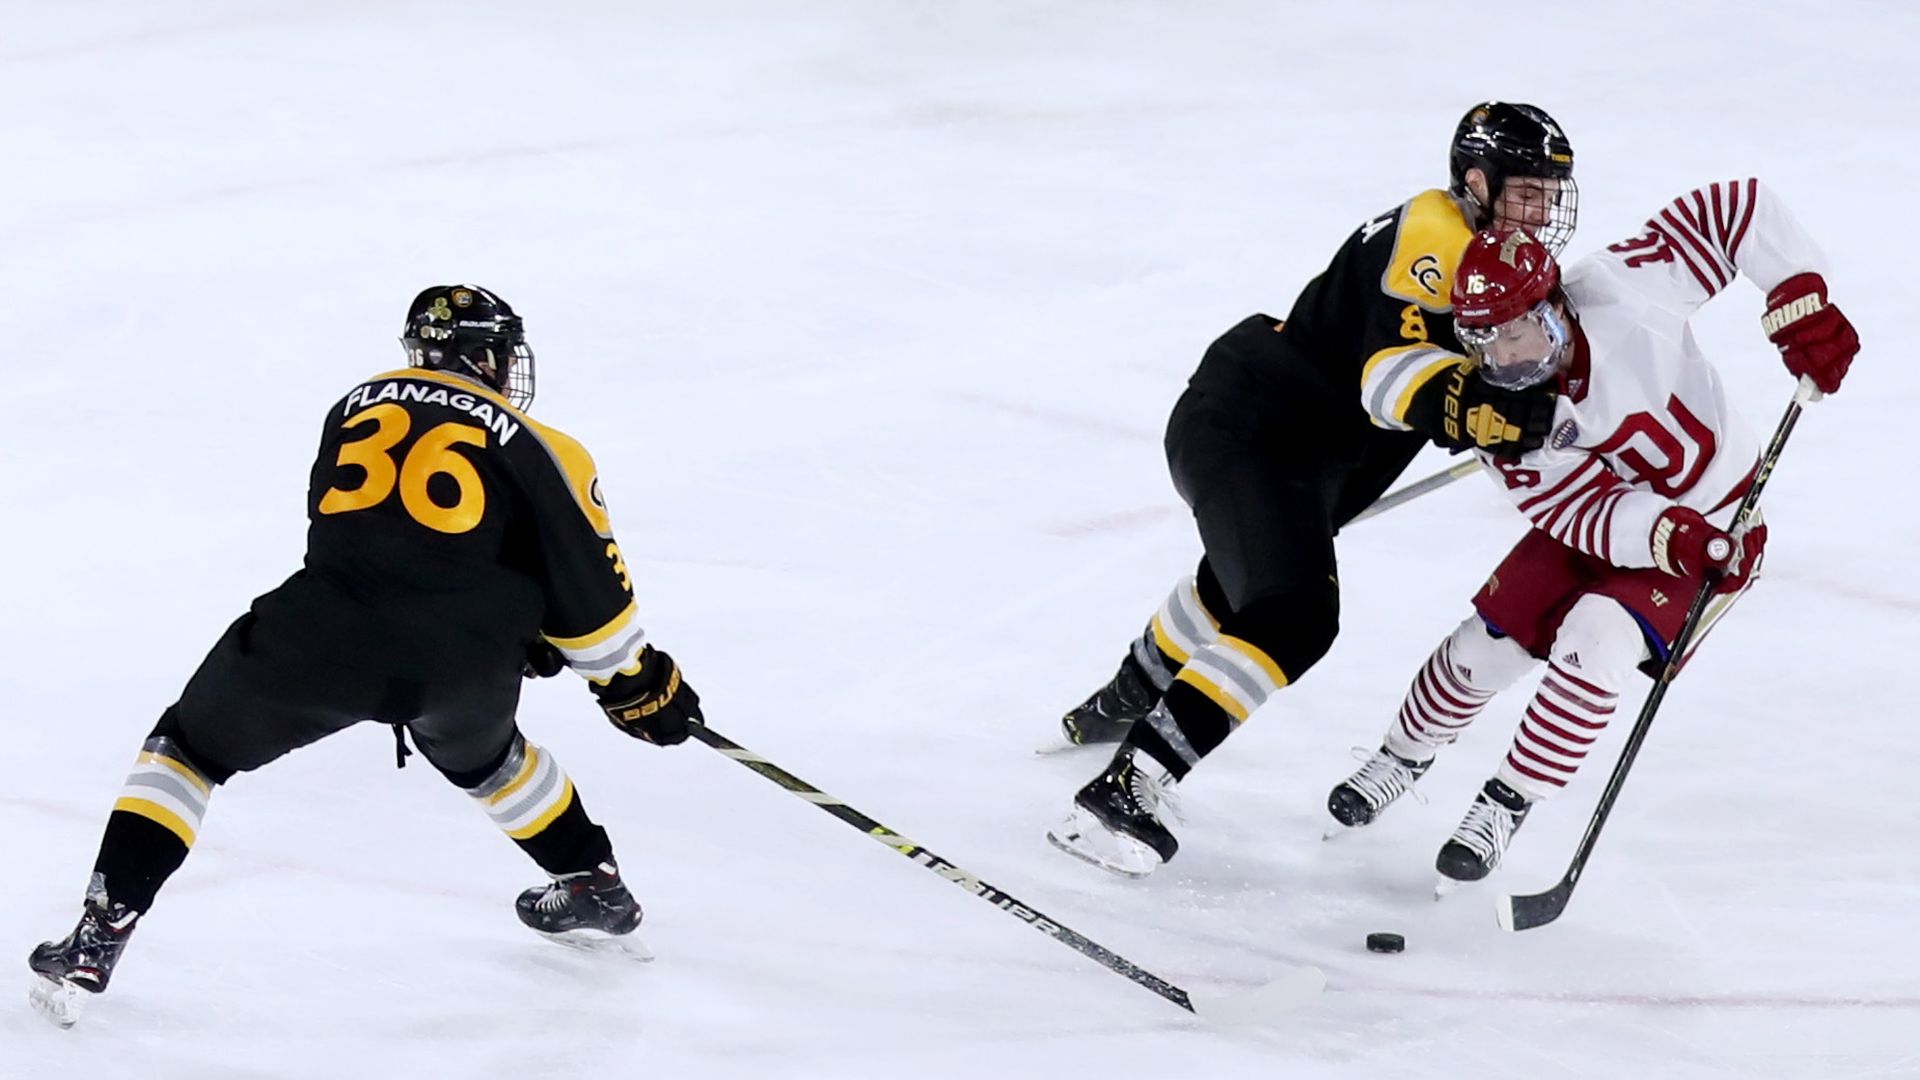 The Denver Pioneers and Colorado College Tigers battle at Magness Arena on March 7, 2020 in Denver. Photo: Lizzy Barrett/Getty Images